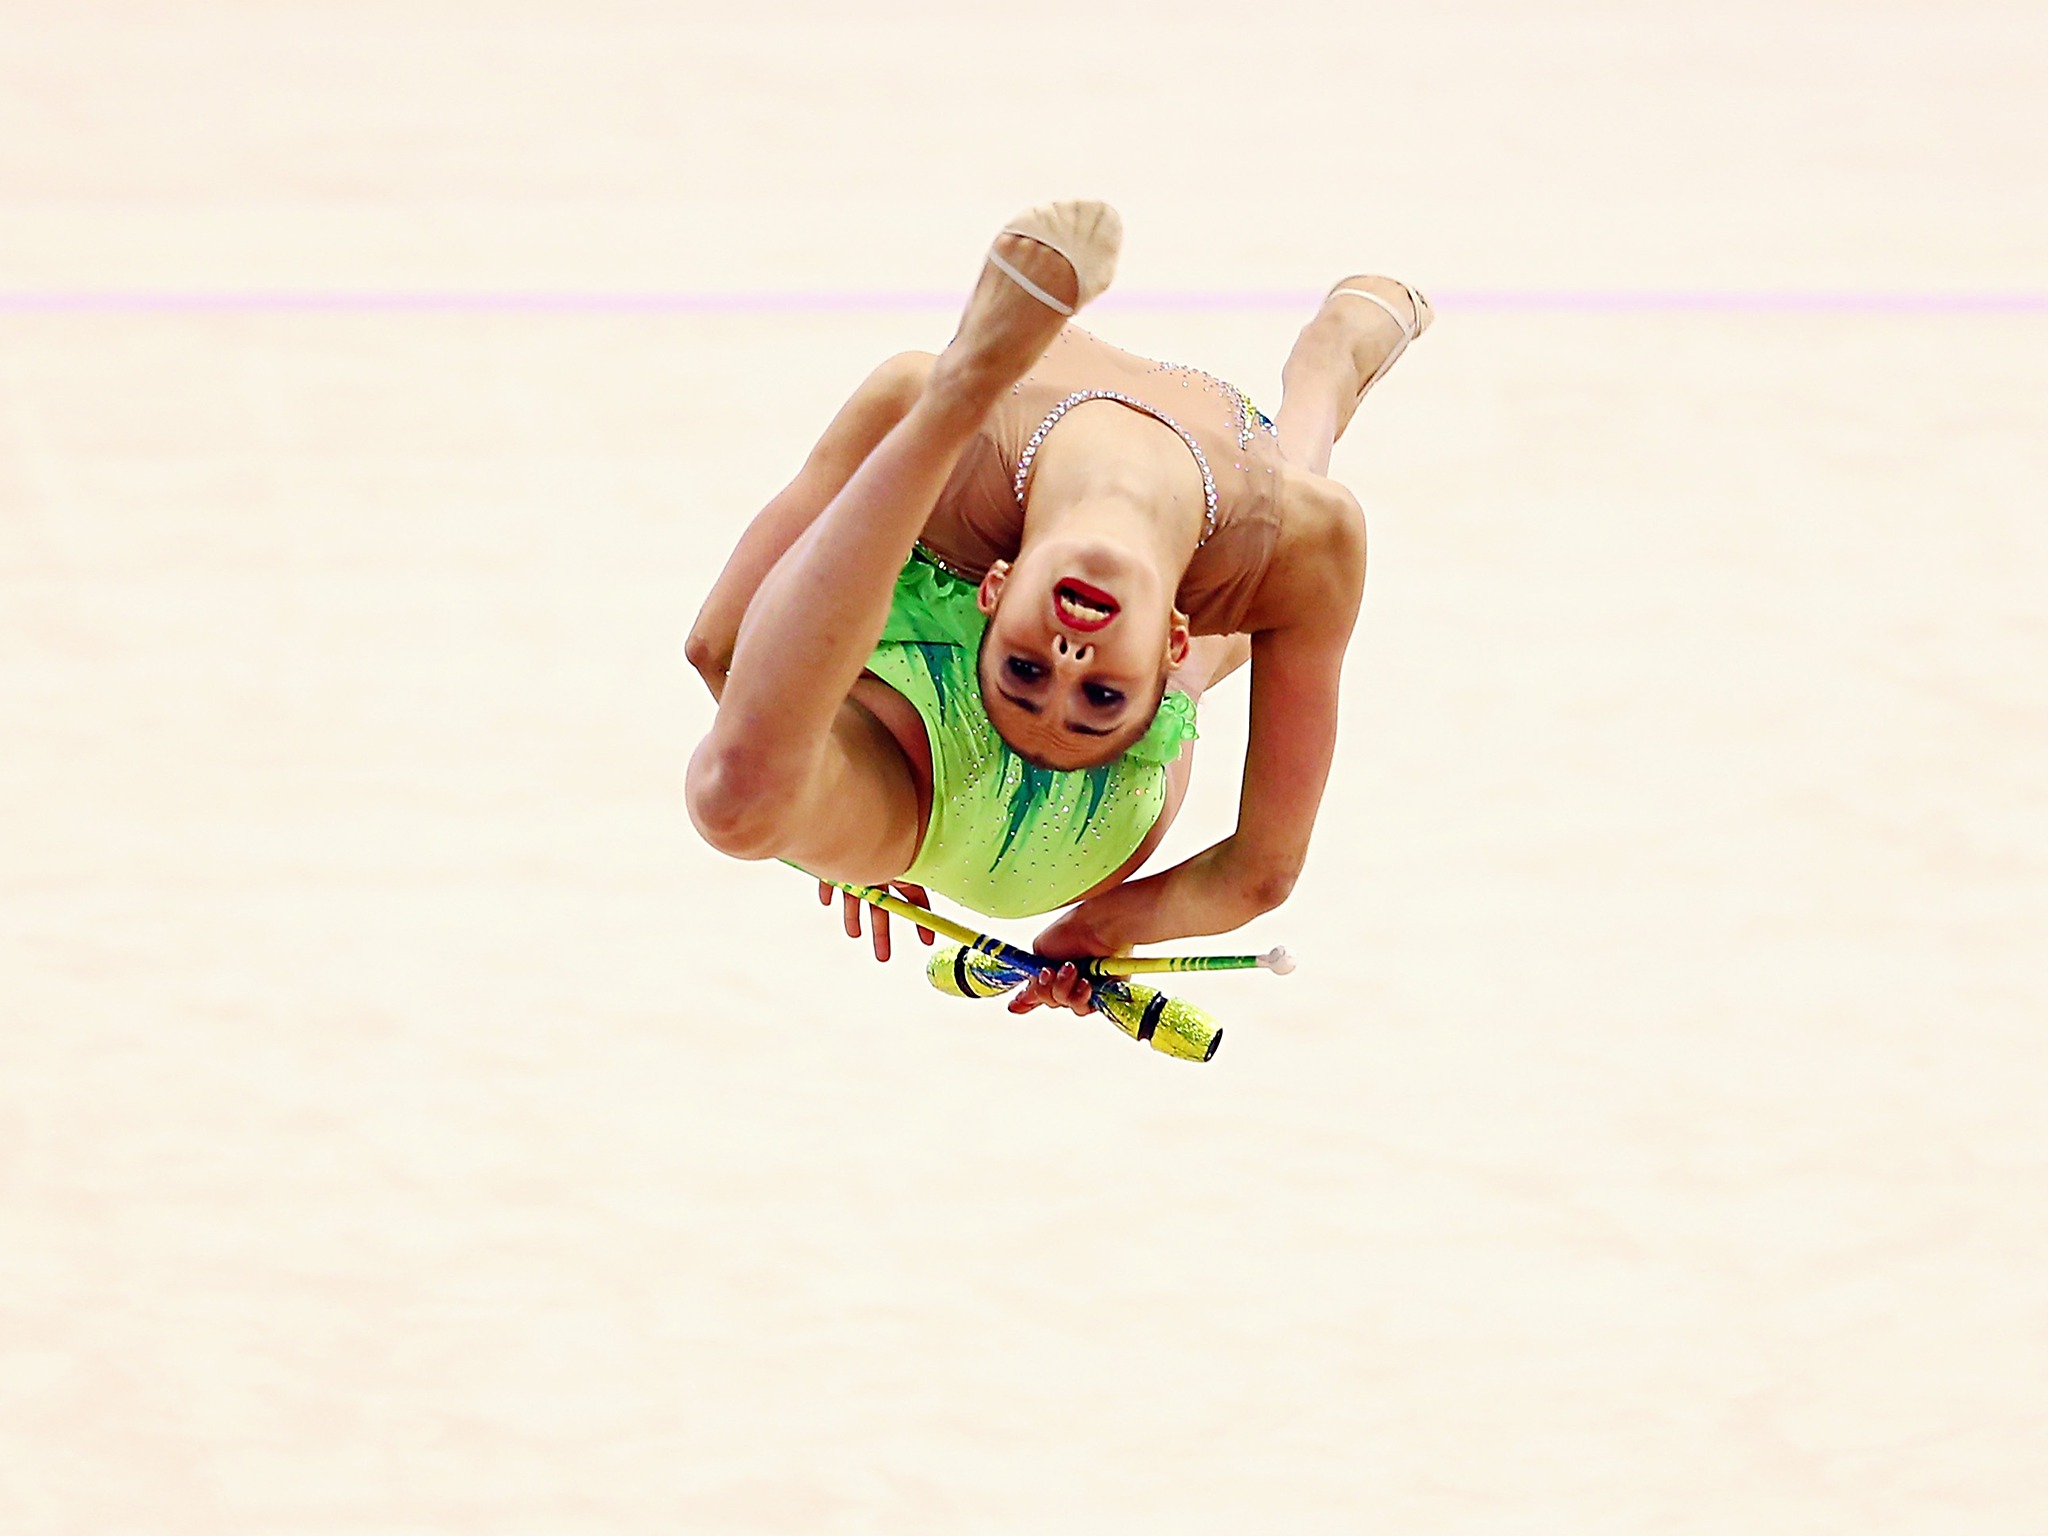 Sport Picture Of The Day Gymnast Or Contortionist